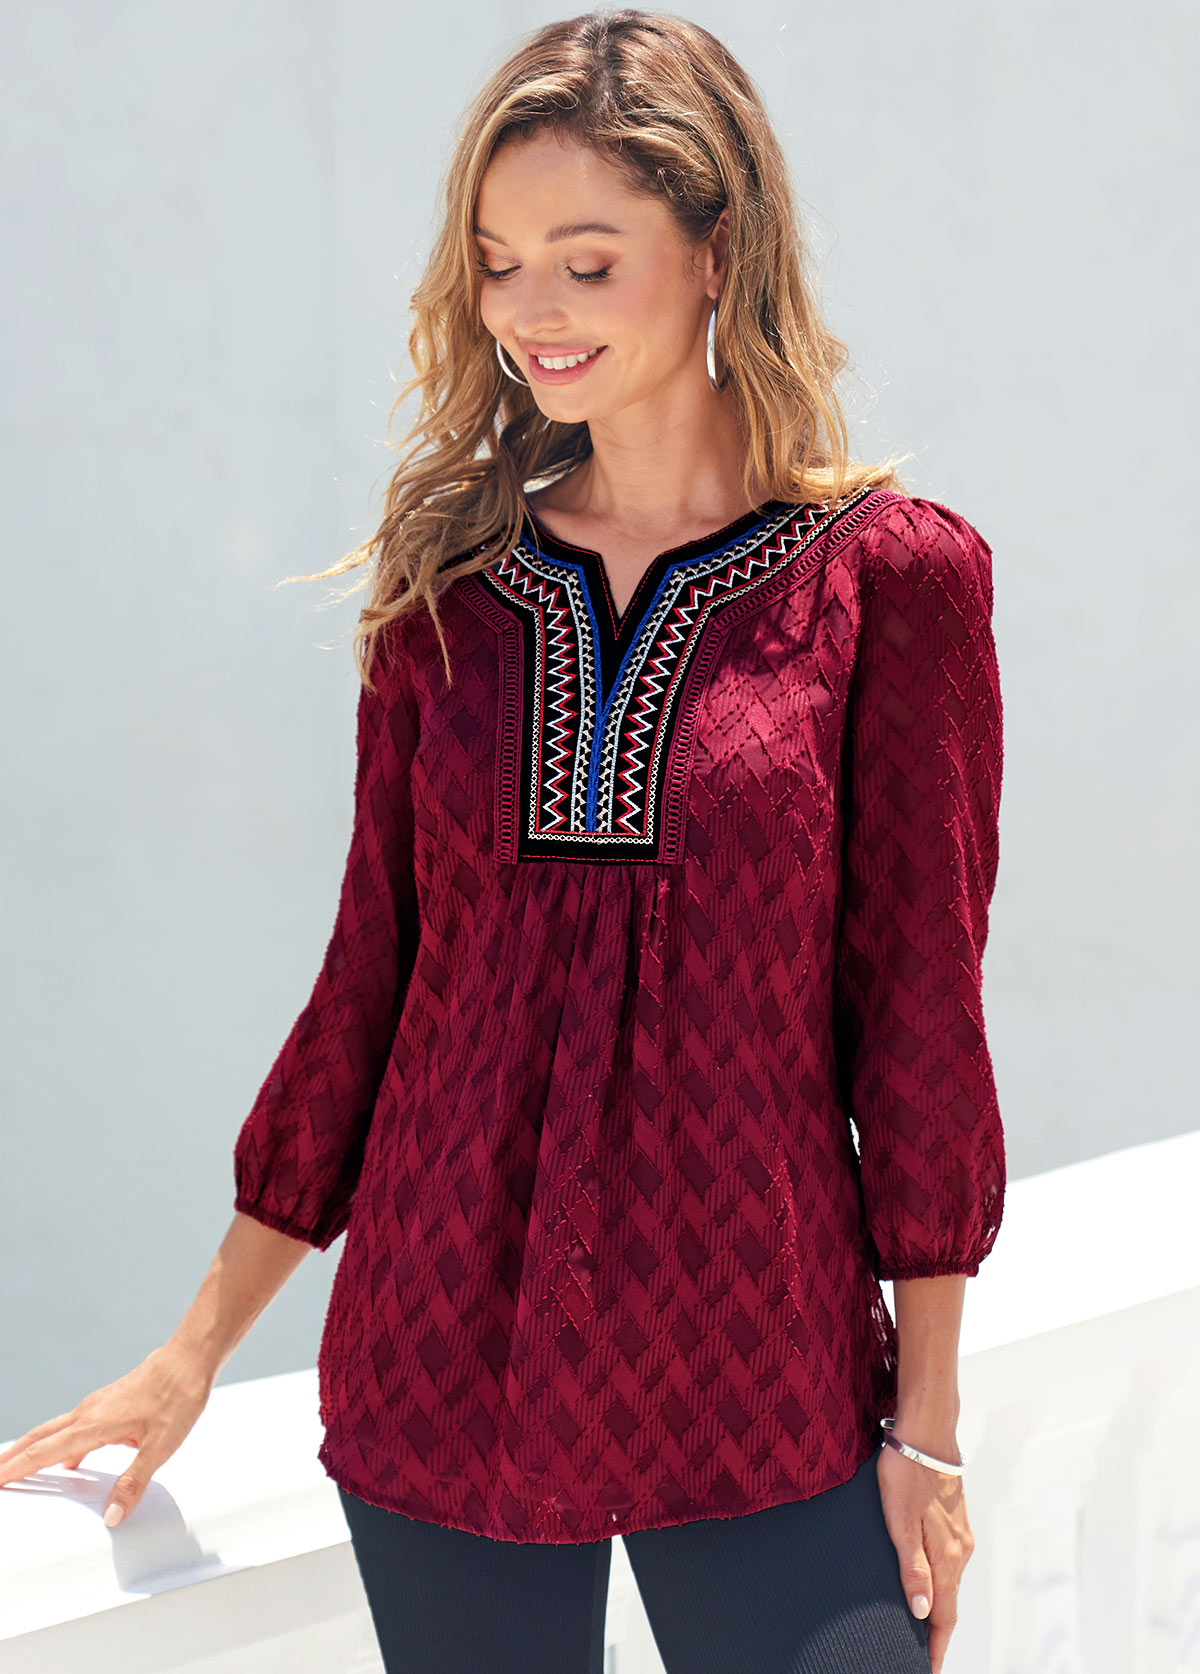 Textured Fabric Split Neck Wine Red Blouse